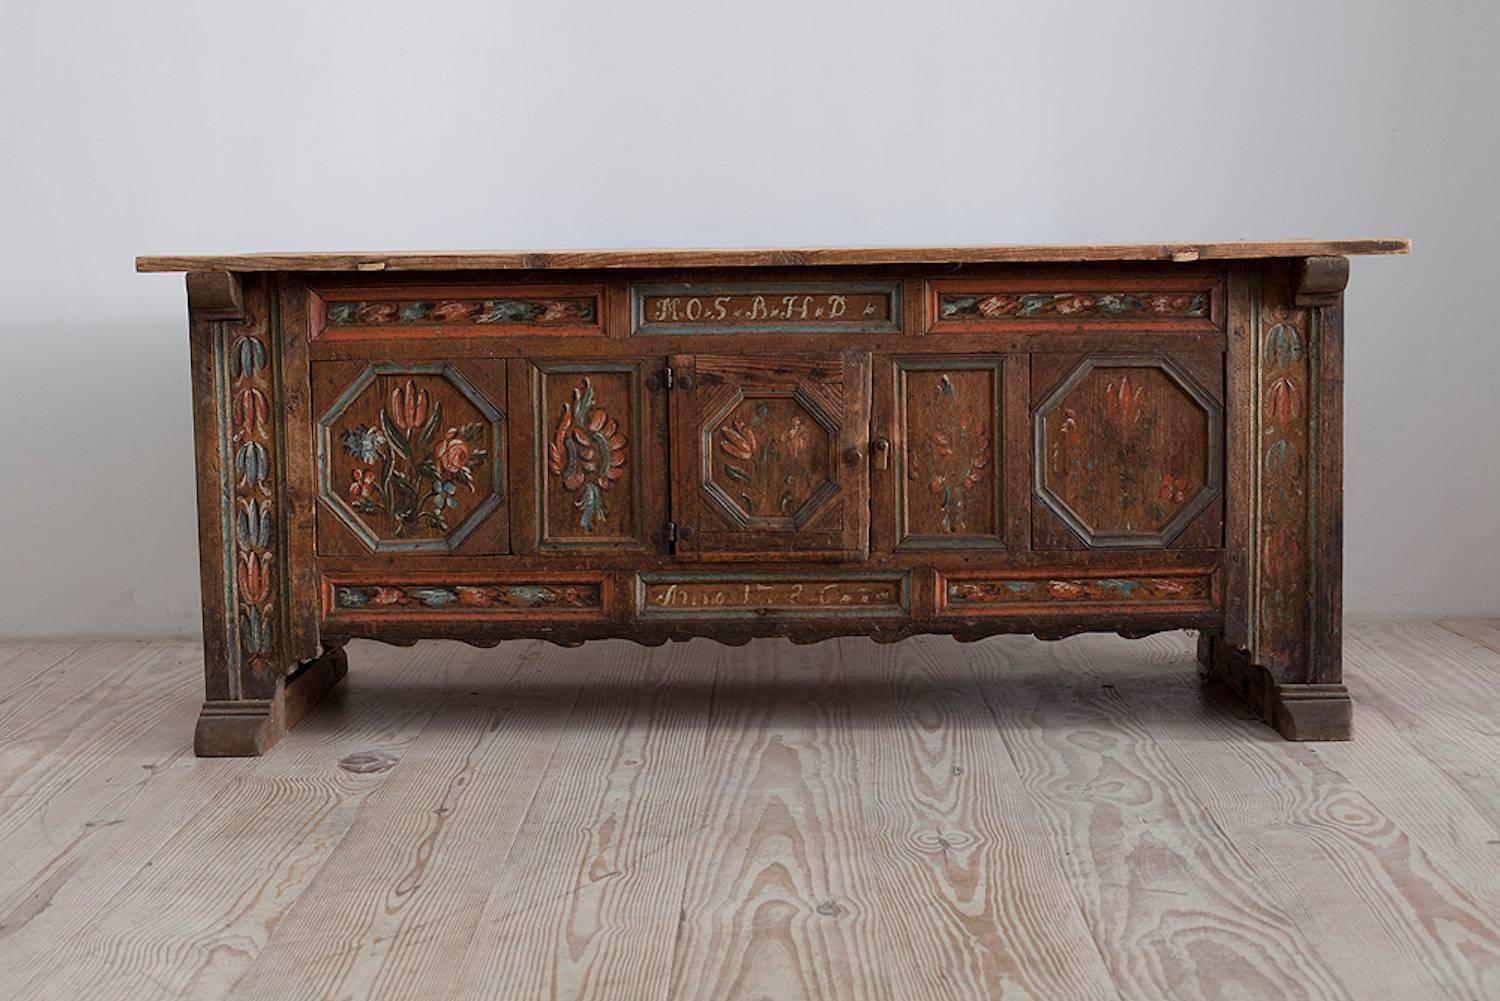 Rare 18th century Swedish sideboard with center door, kistbord med dörr, inscribed and dated: M.O.S / B.H.D. / Anno 1786, original paint, origin: Skåne, Sweden.

Rarely seen for sale, these sideboards, historically, would be located in the Manor